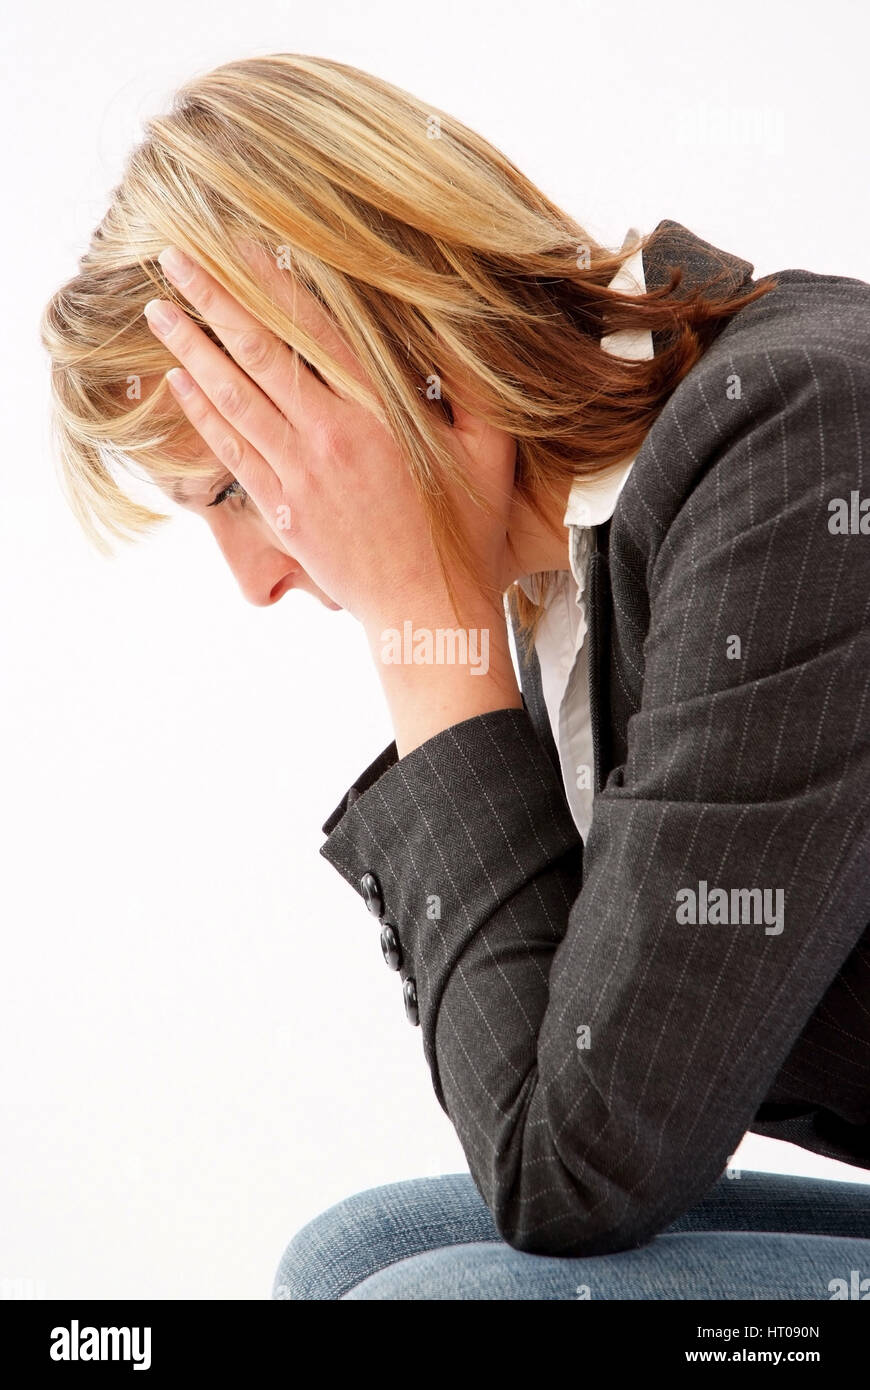 Junge Frau ist traurig - young woman with depressions Stock Photo